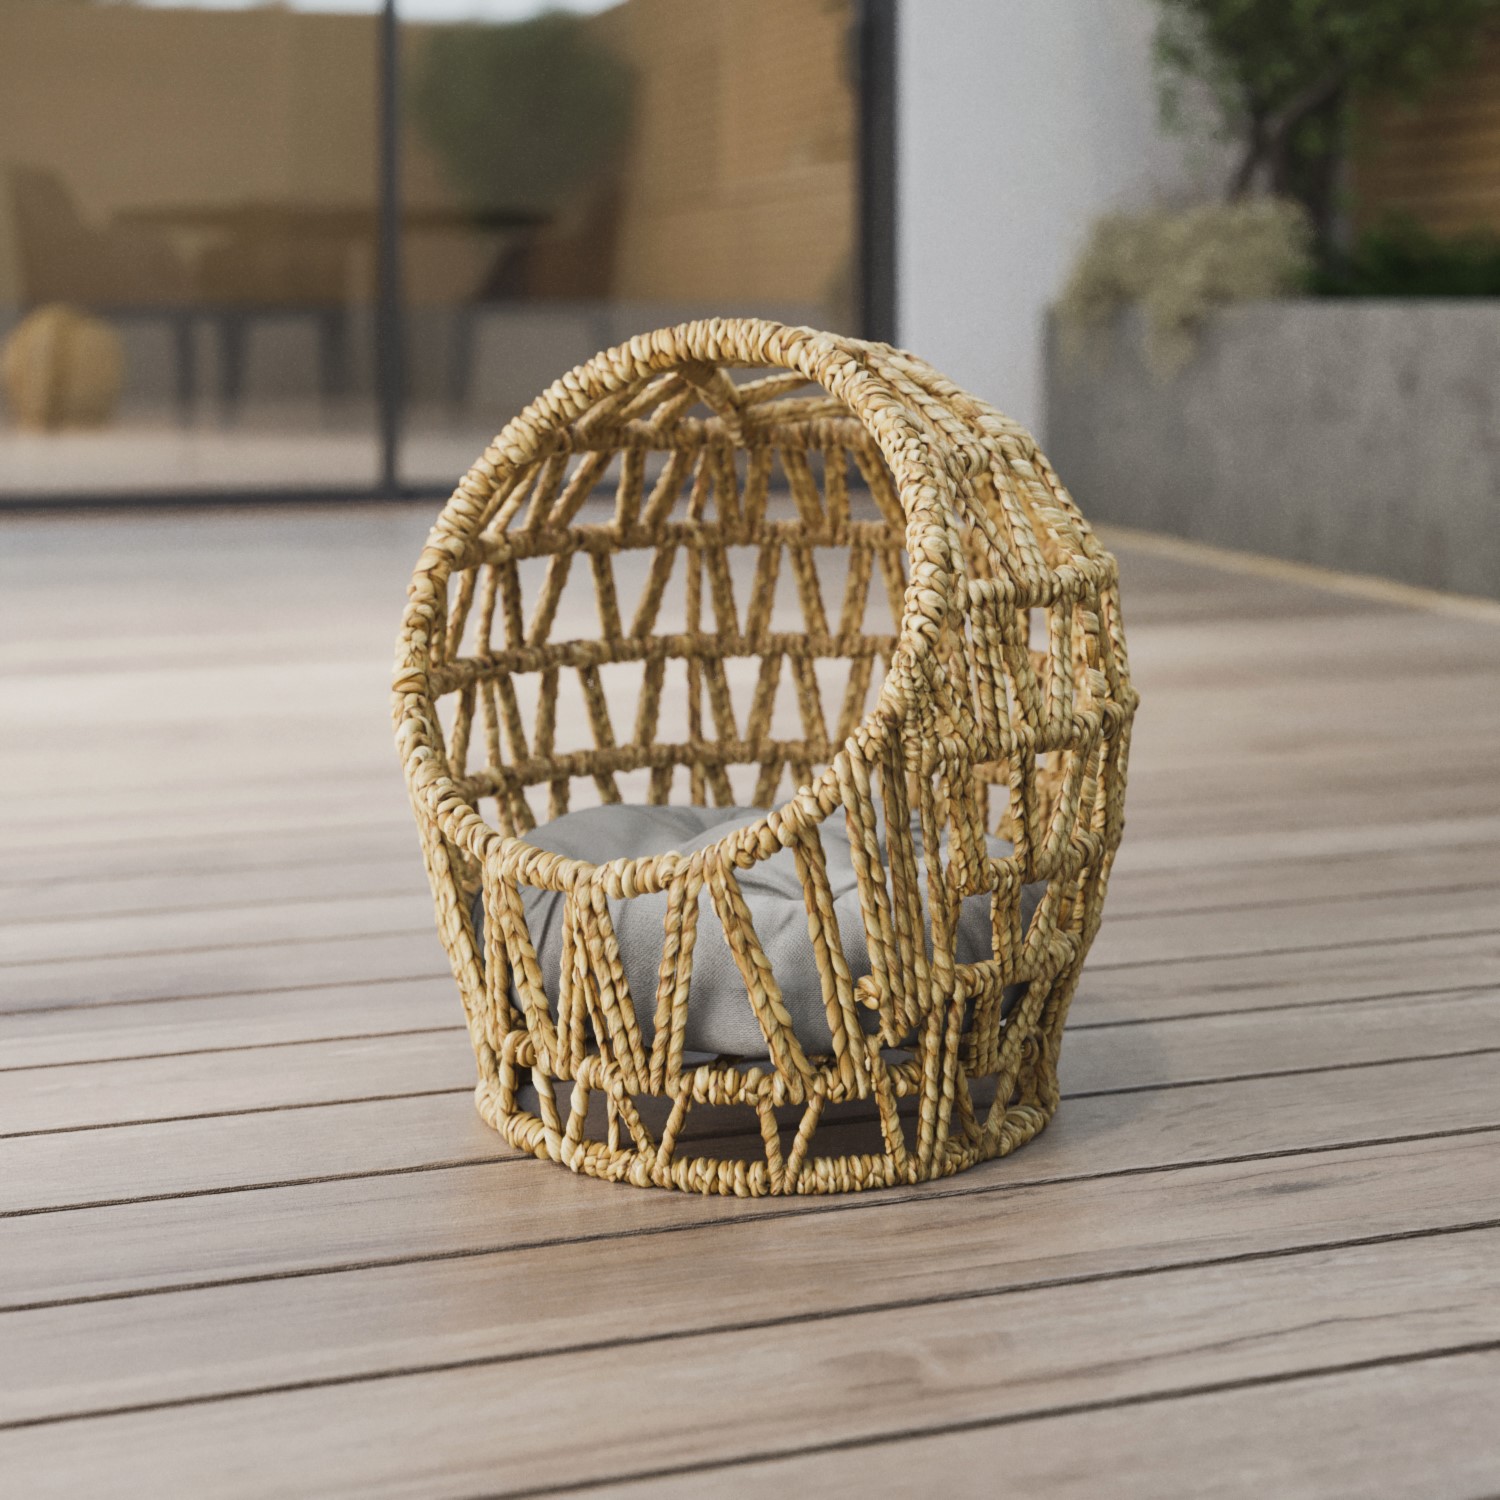 Read more about Outdoor rattan dome pet bed